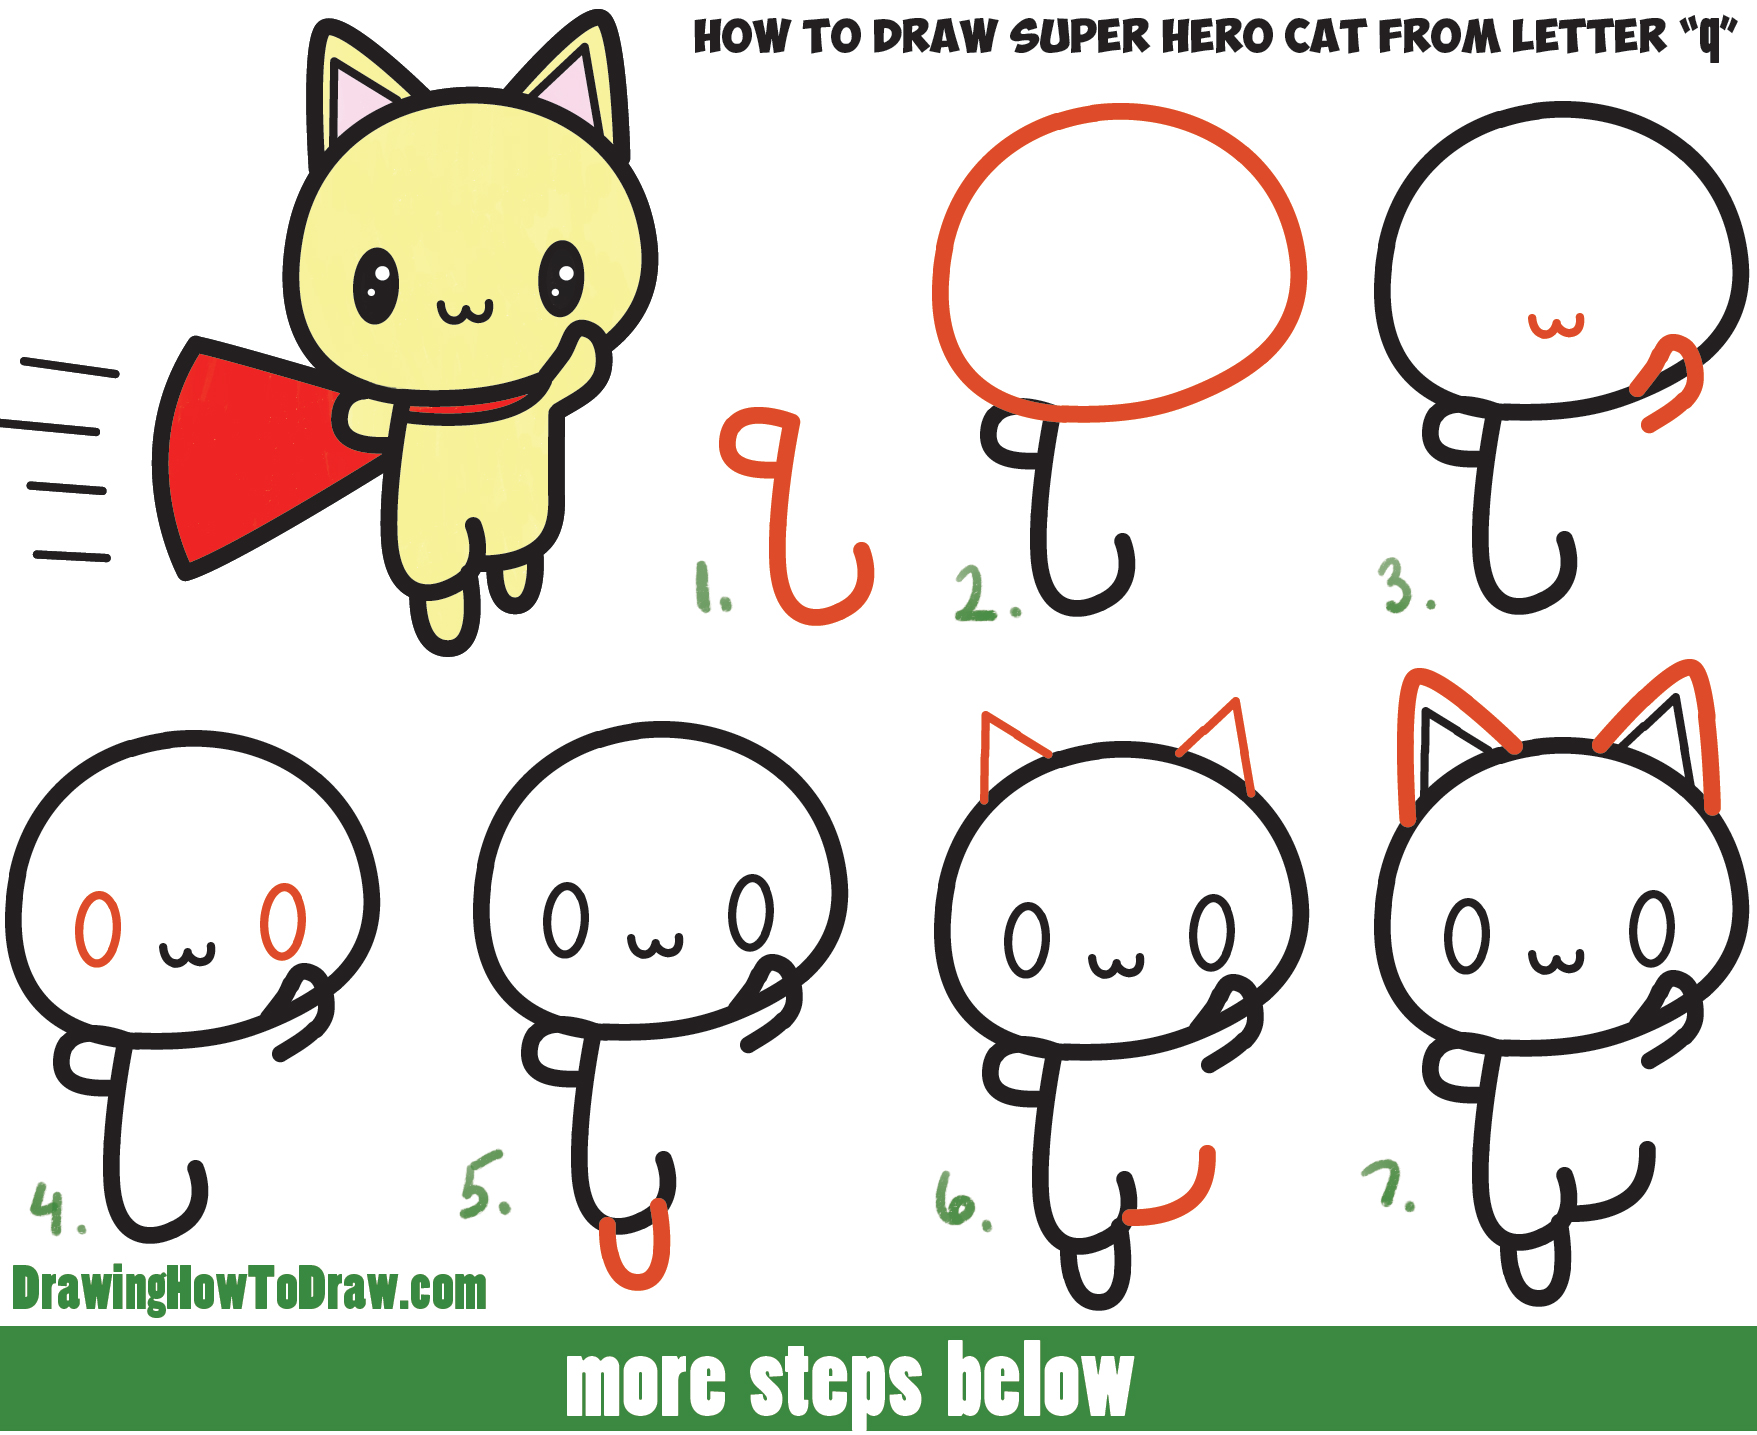 How to Draw a Cute Cat Super Hero (Kawaii) with Easy Step by Step